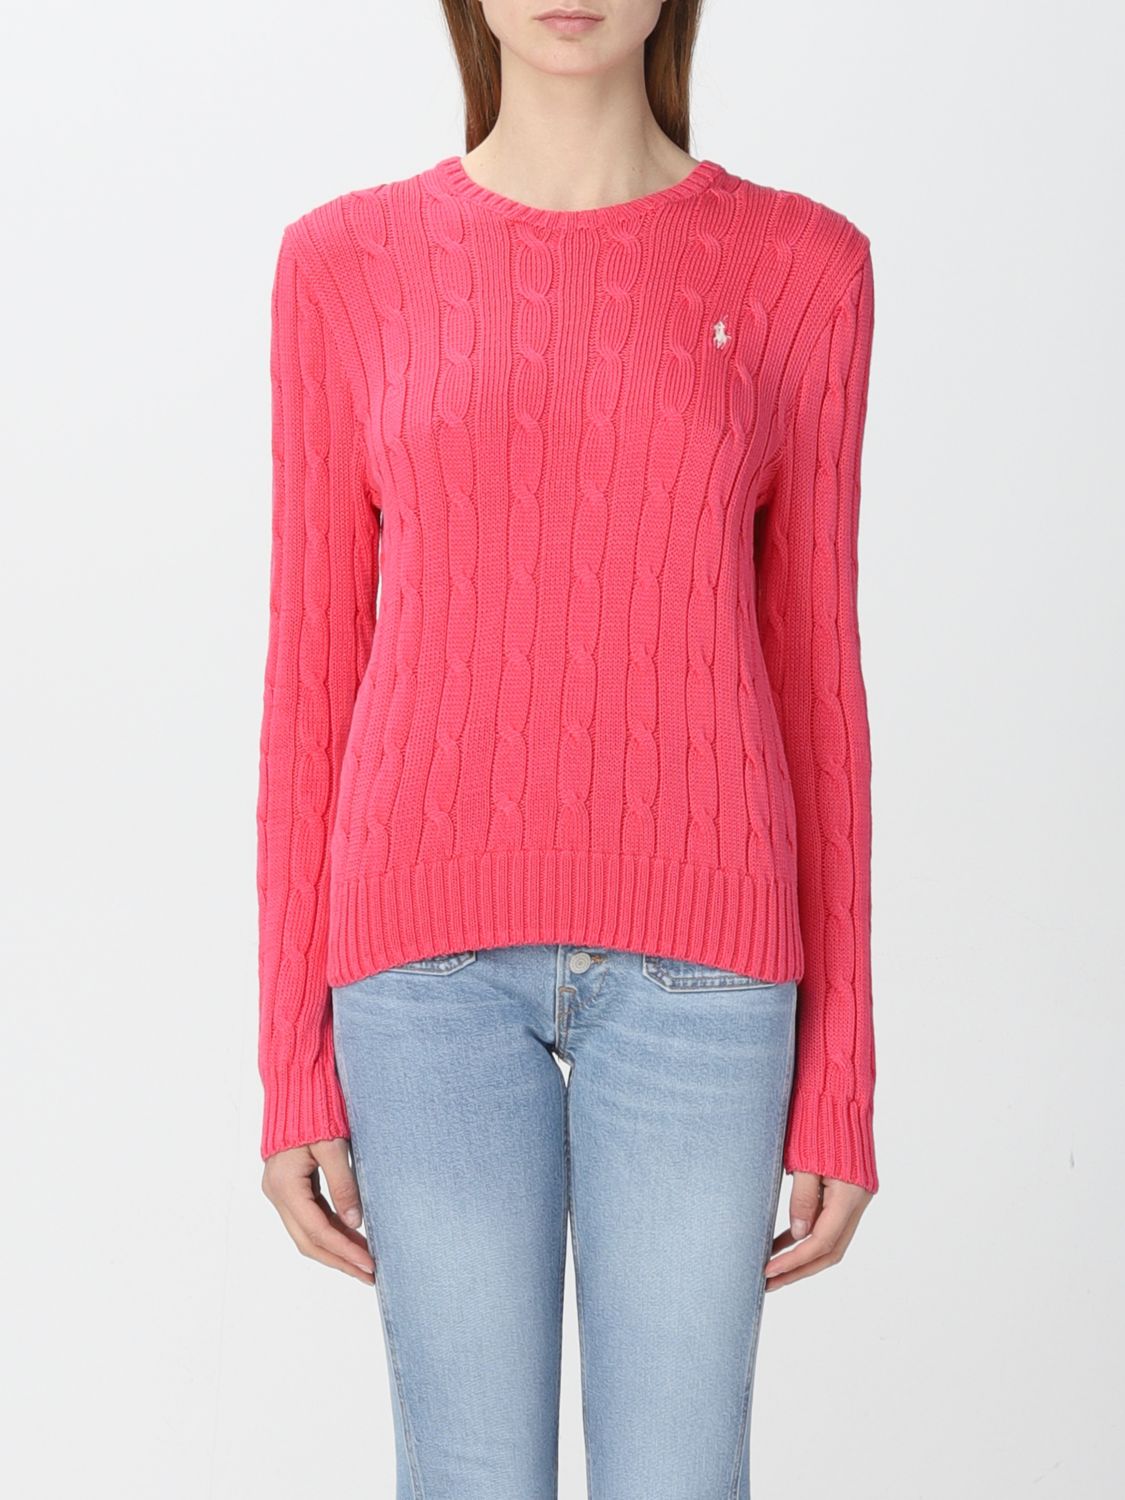 POLO RALPH LAUREN: cable sweater - Baby Pink | Polo Ralph Lauren ...